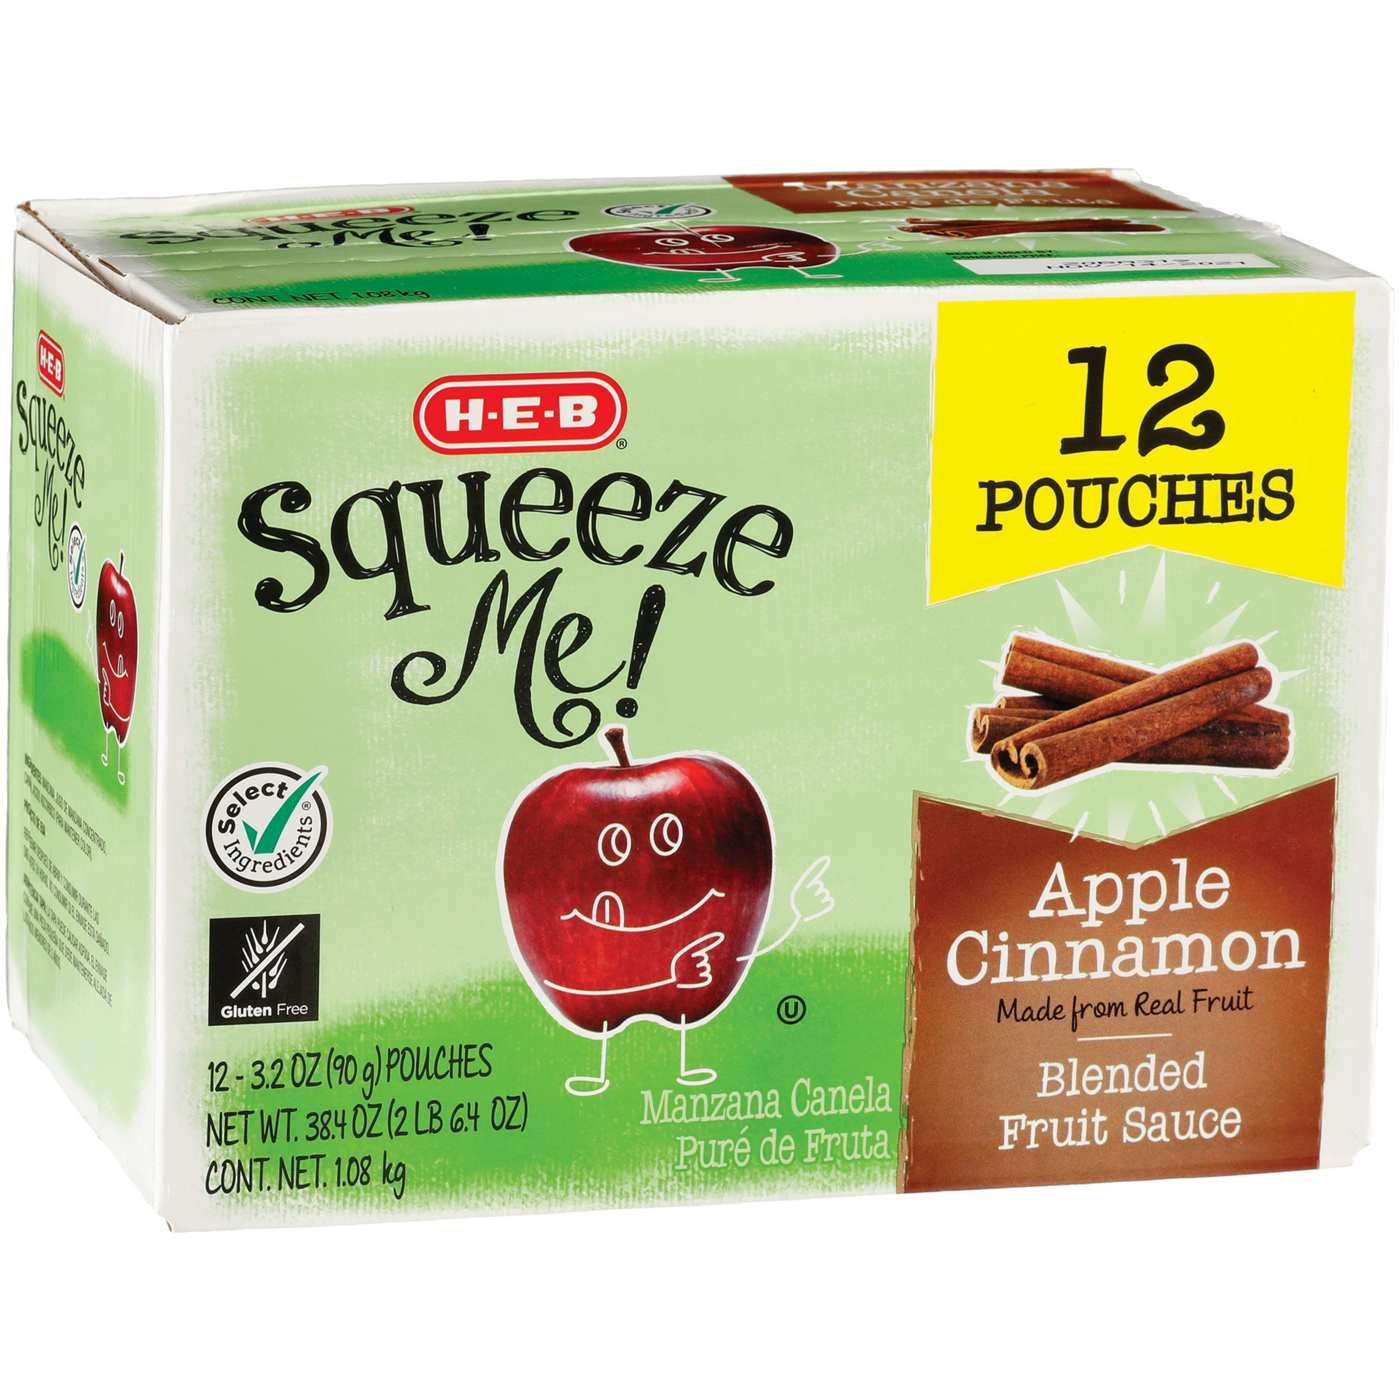 H-E-B Squeeze Me! Apple Cinnamon Applesauce Pouches; image 1 of 2